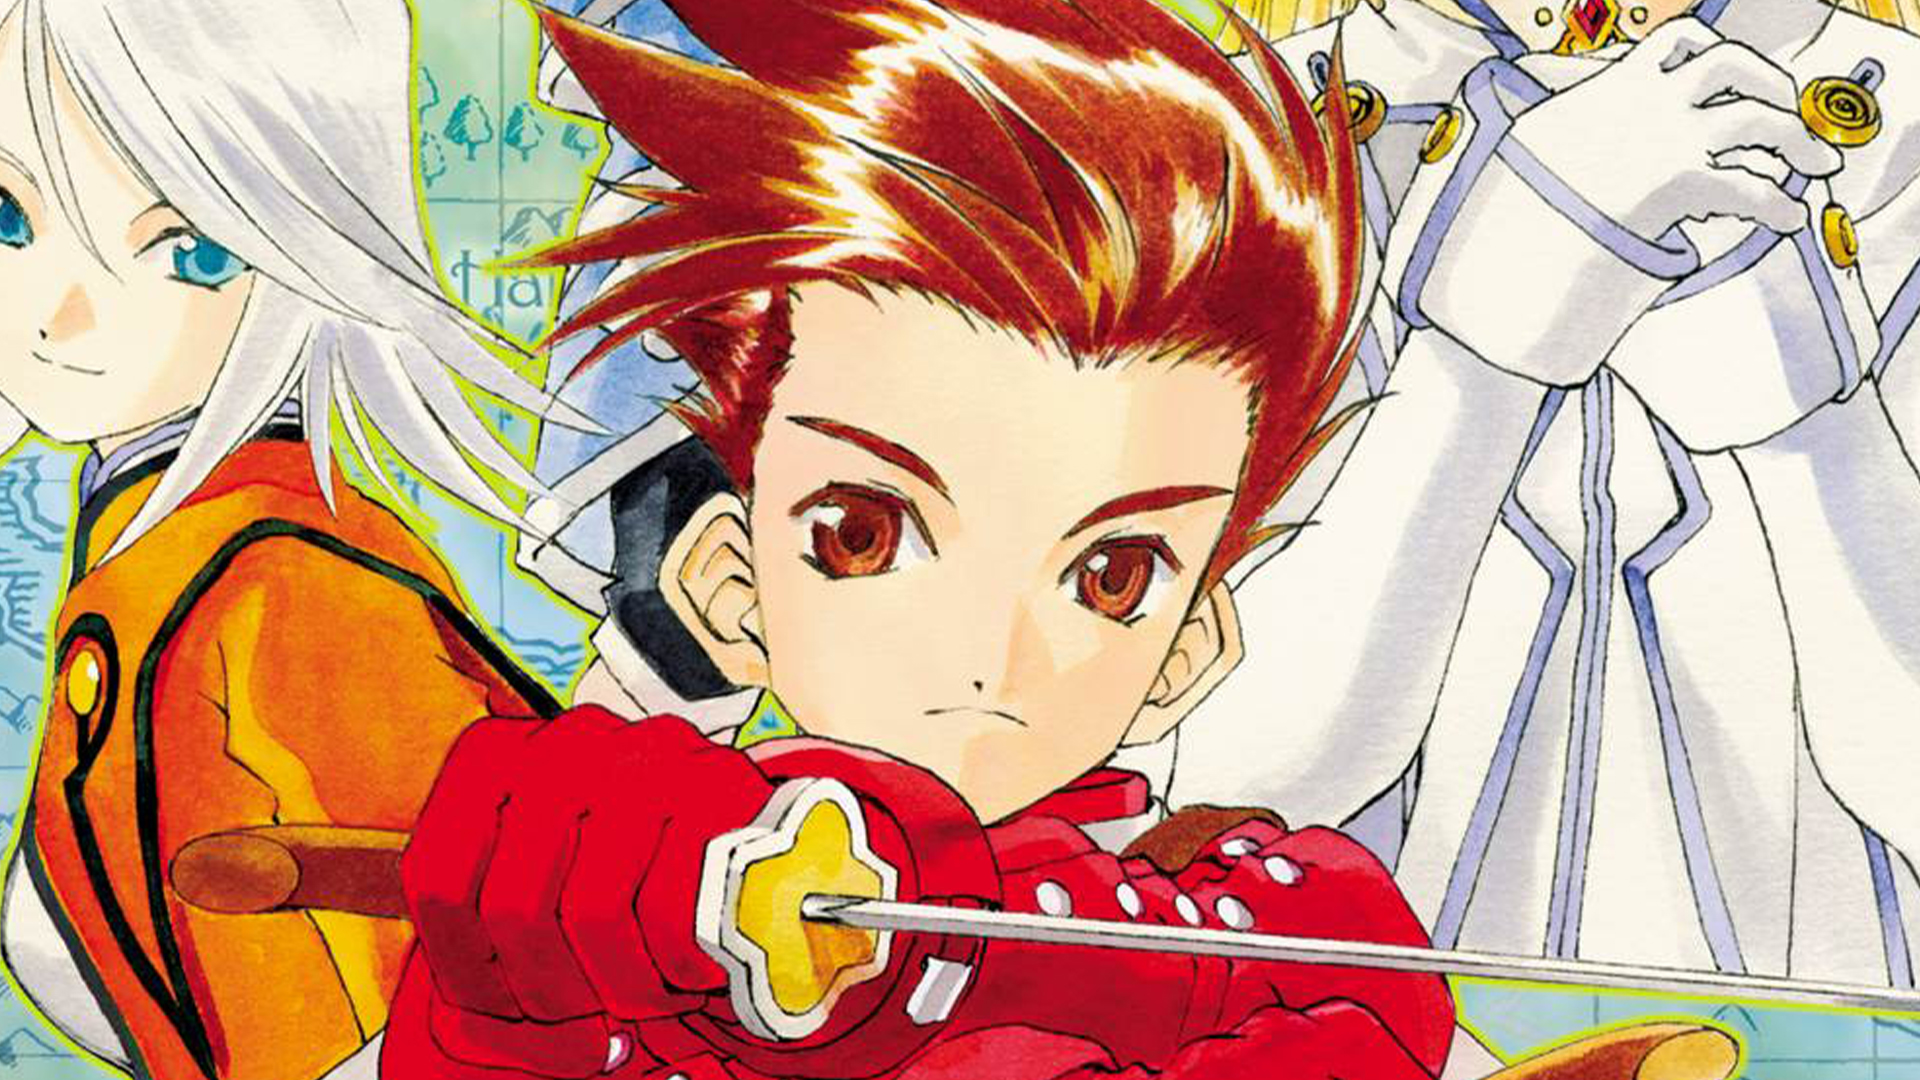 tales of symphonia remaster switch